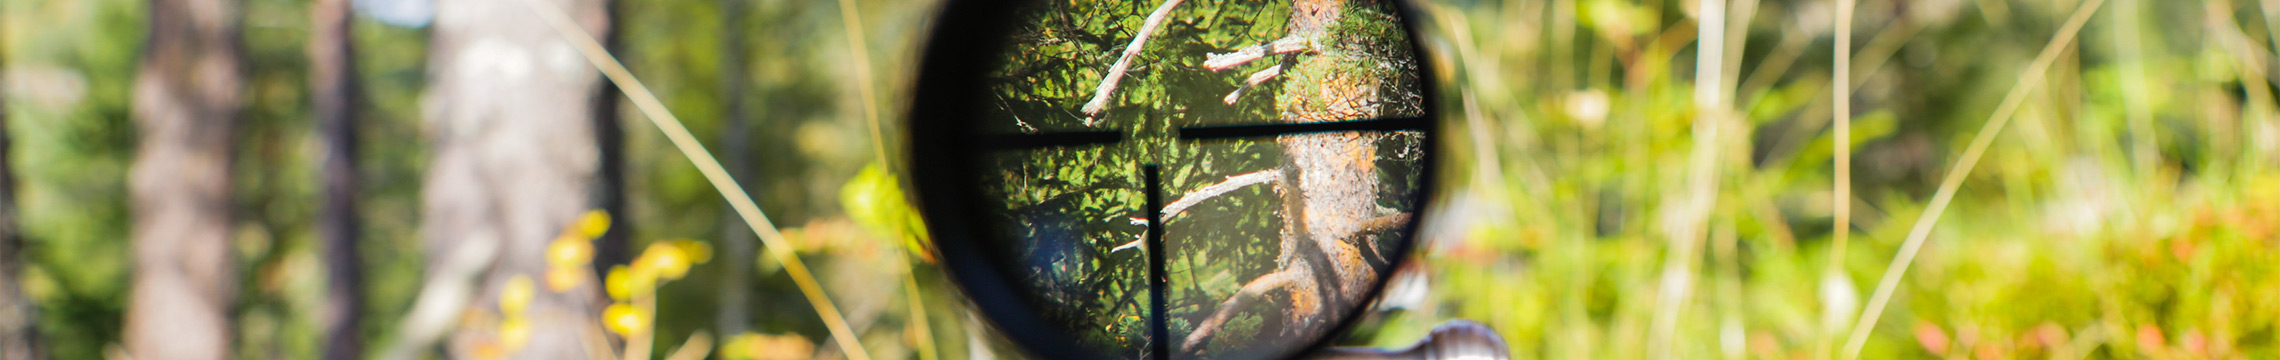 View of brush through a rifle scope